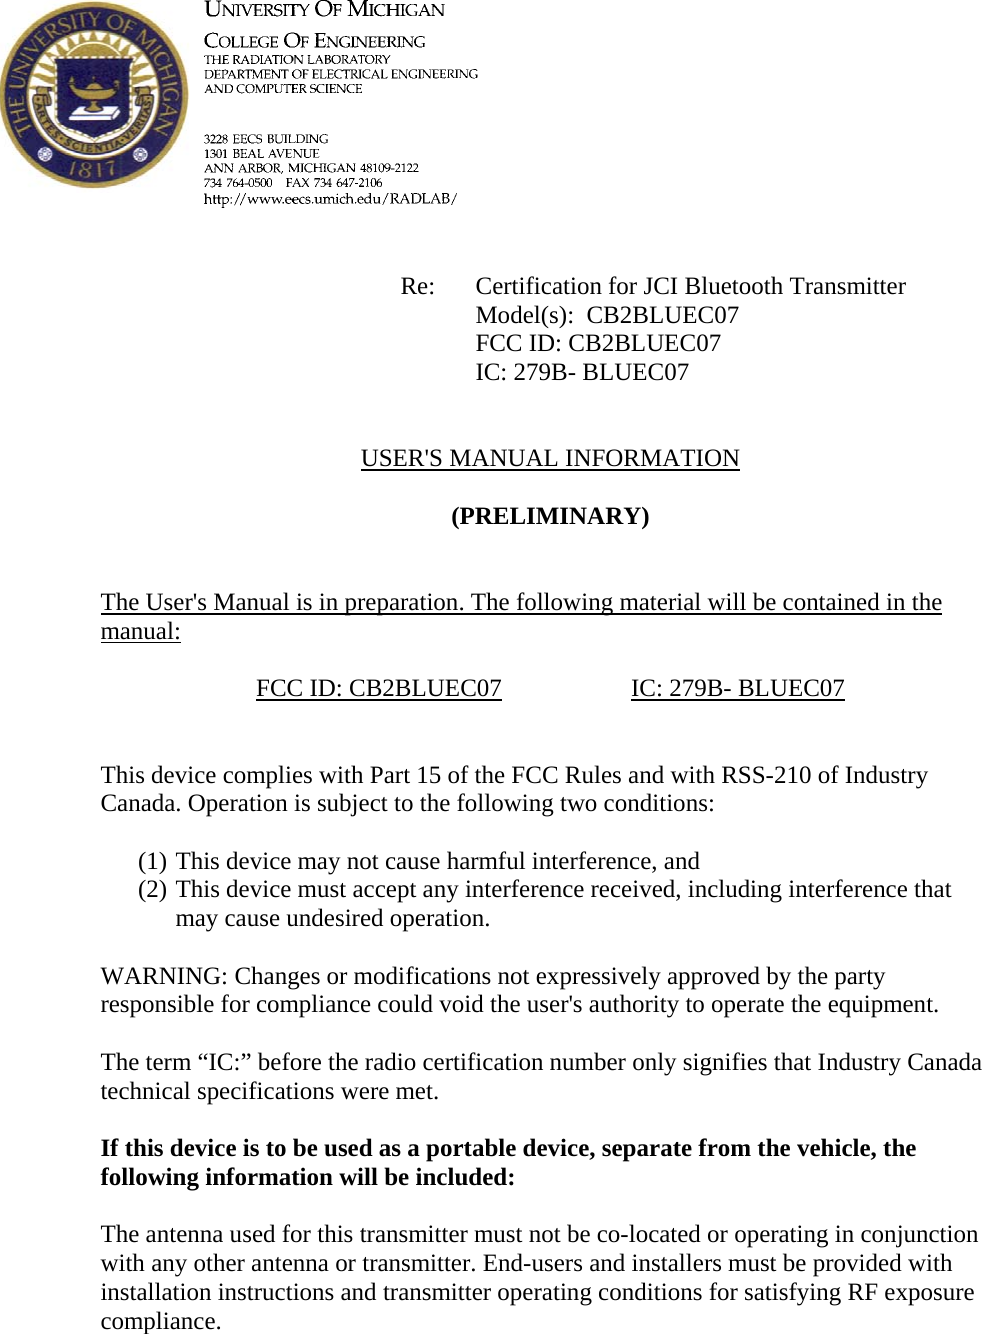             Re: Certification for JCI Bluetooth Transmitter      Model(s):  CB2BLUEC07      FCC ID: CB2BLUEC07      IC: 279B- BLUEC07   USER&apos;S MANUAL INFORMATION  (PRELIMINARY)   The User&apos;s Manual is in preparation. The following material will be contained in the manual:  FCC ID: CB2BLUEC07    IC: 279B- BLUEC07   This device complies with Part 15 of the FCC Rules and with RSS-210 of Industry Canada. Operation is subject to the following two conditions:  (1) This device may not cause harmful interference, and (2) This device must accept any interference received, including interference that may cause undesired operation.  WARNING: Changes or modifications not expressively approved by the party responsible for compliance could void the user&apos;s authority to operate the equipment.  The term “IC:” before the radio certification number only signifies that Industry Canada technical specifications were met.  If this device is to be used as a portable device, separate from the vehicle, the following information will be included:   The antenna used for this transmitter must not be co-located or operating in conjunction with any other antenna or transmitter. End-users and installers must be provided with installation instructions and transmitter operating conditions for satisfying RF exposure compliance.    